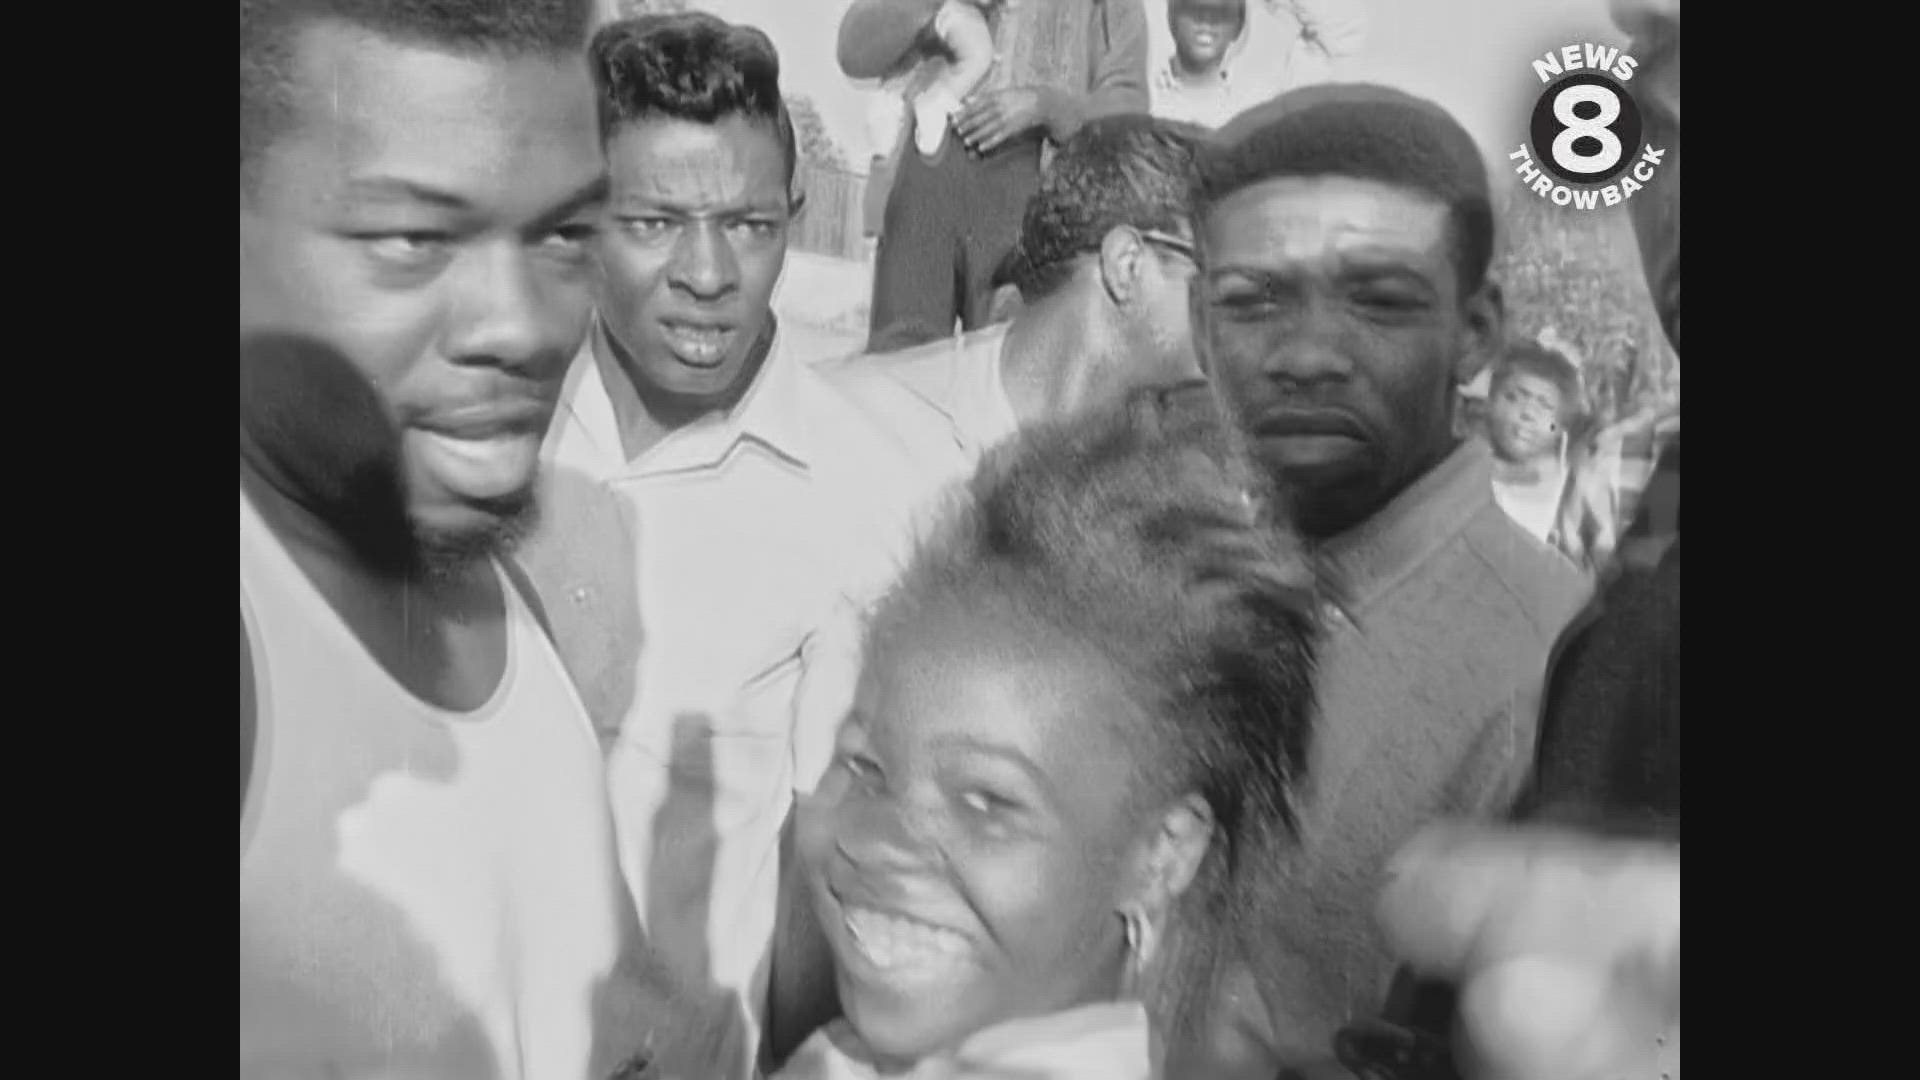 Muhammad Ali protects a CBS 8 news crew from angry mob while visiting San Diego in 1967.